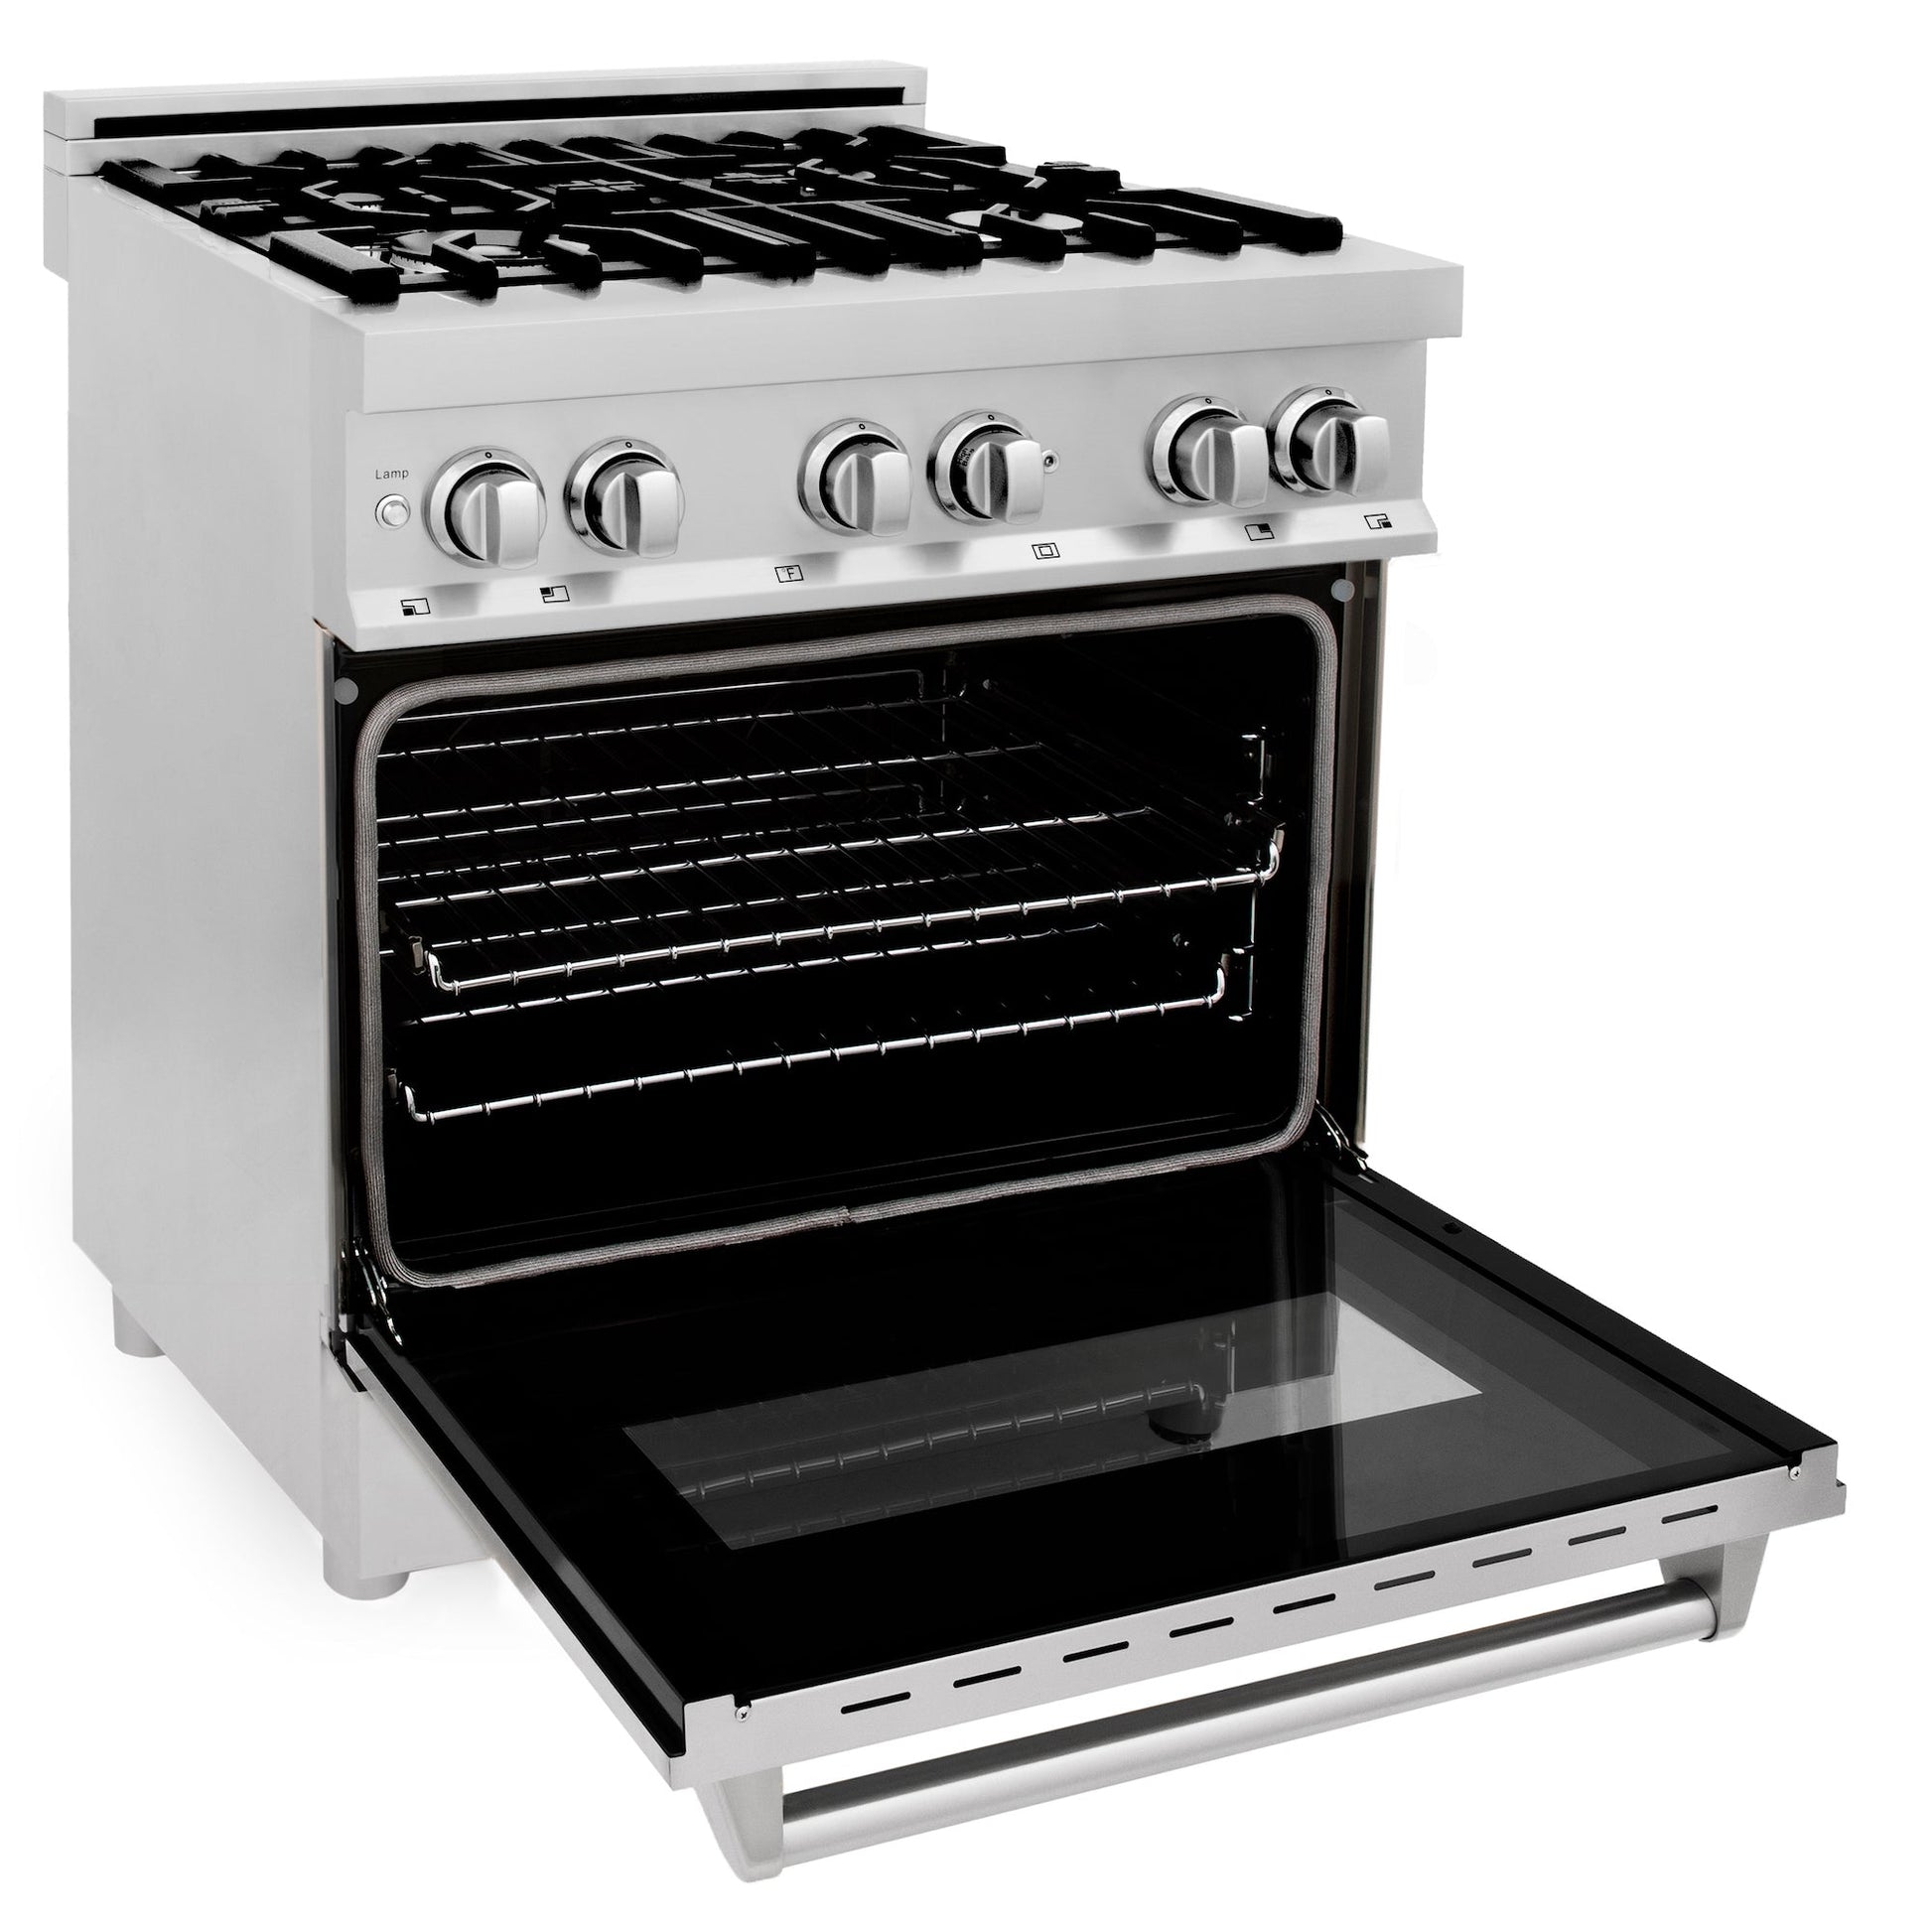 ZLINE 2-Appliance 30" Kitchen Package with Stainless Steel Dual Fuel Range and Convertible Vent Range Hood